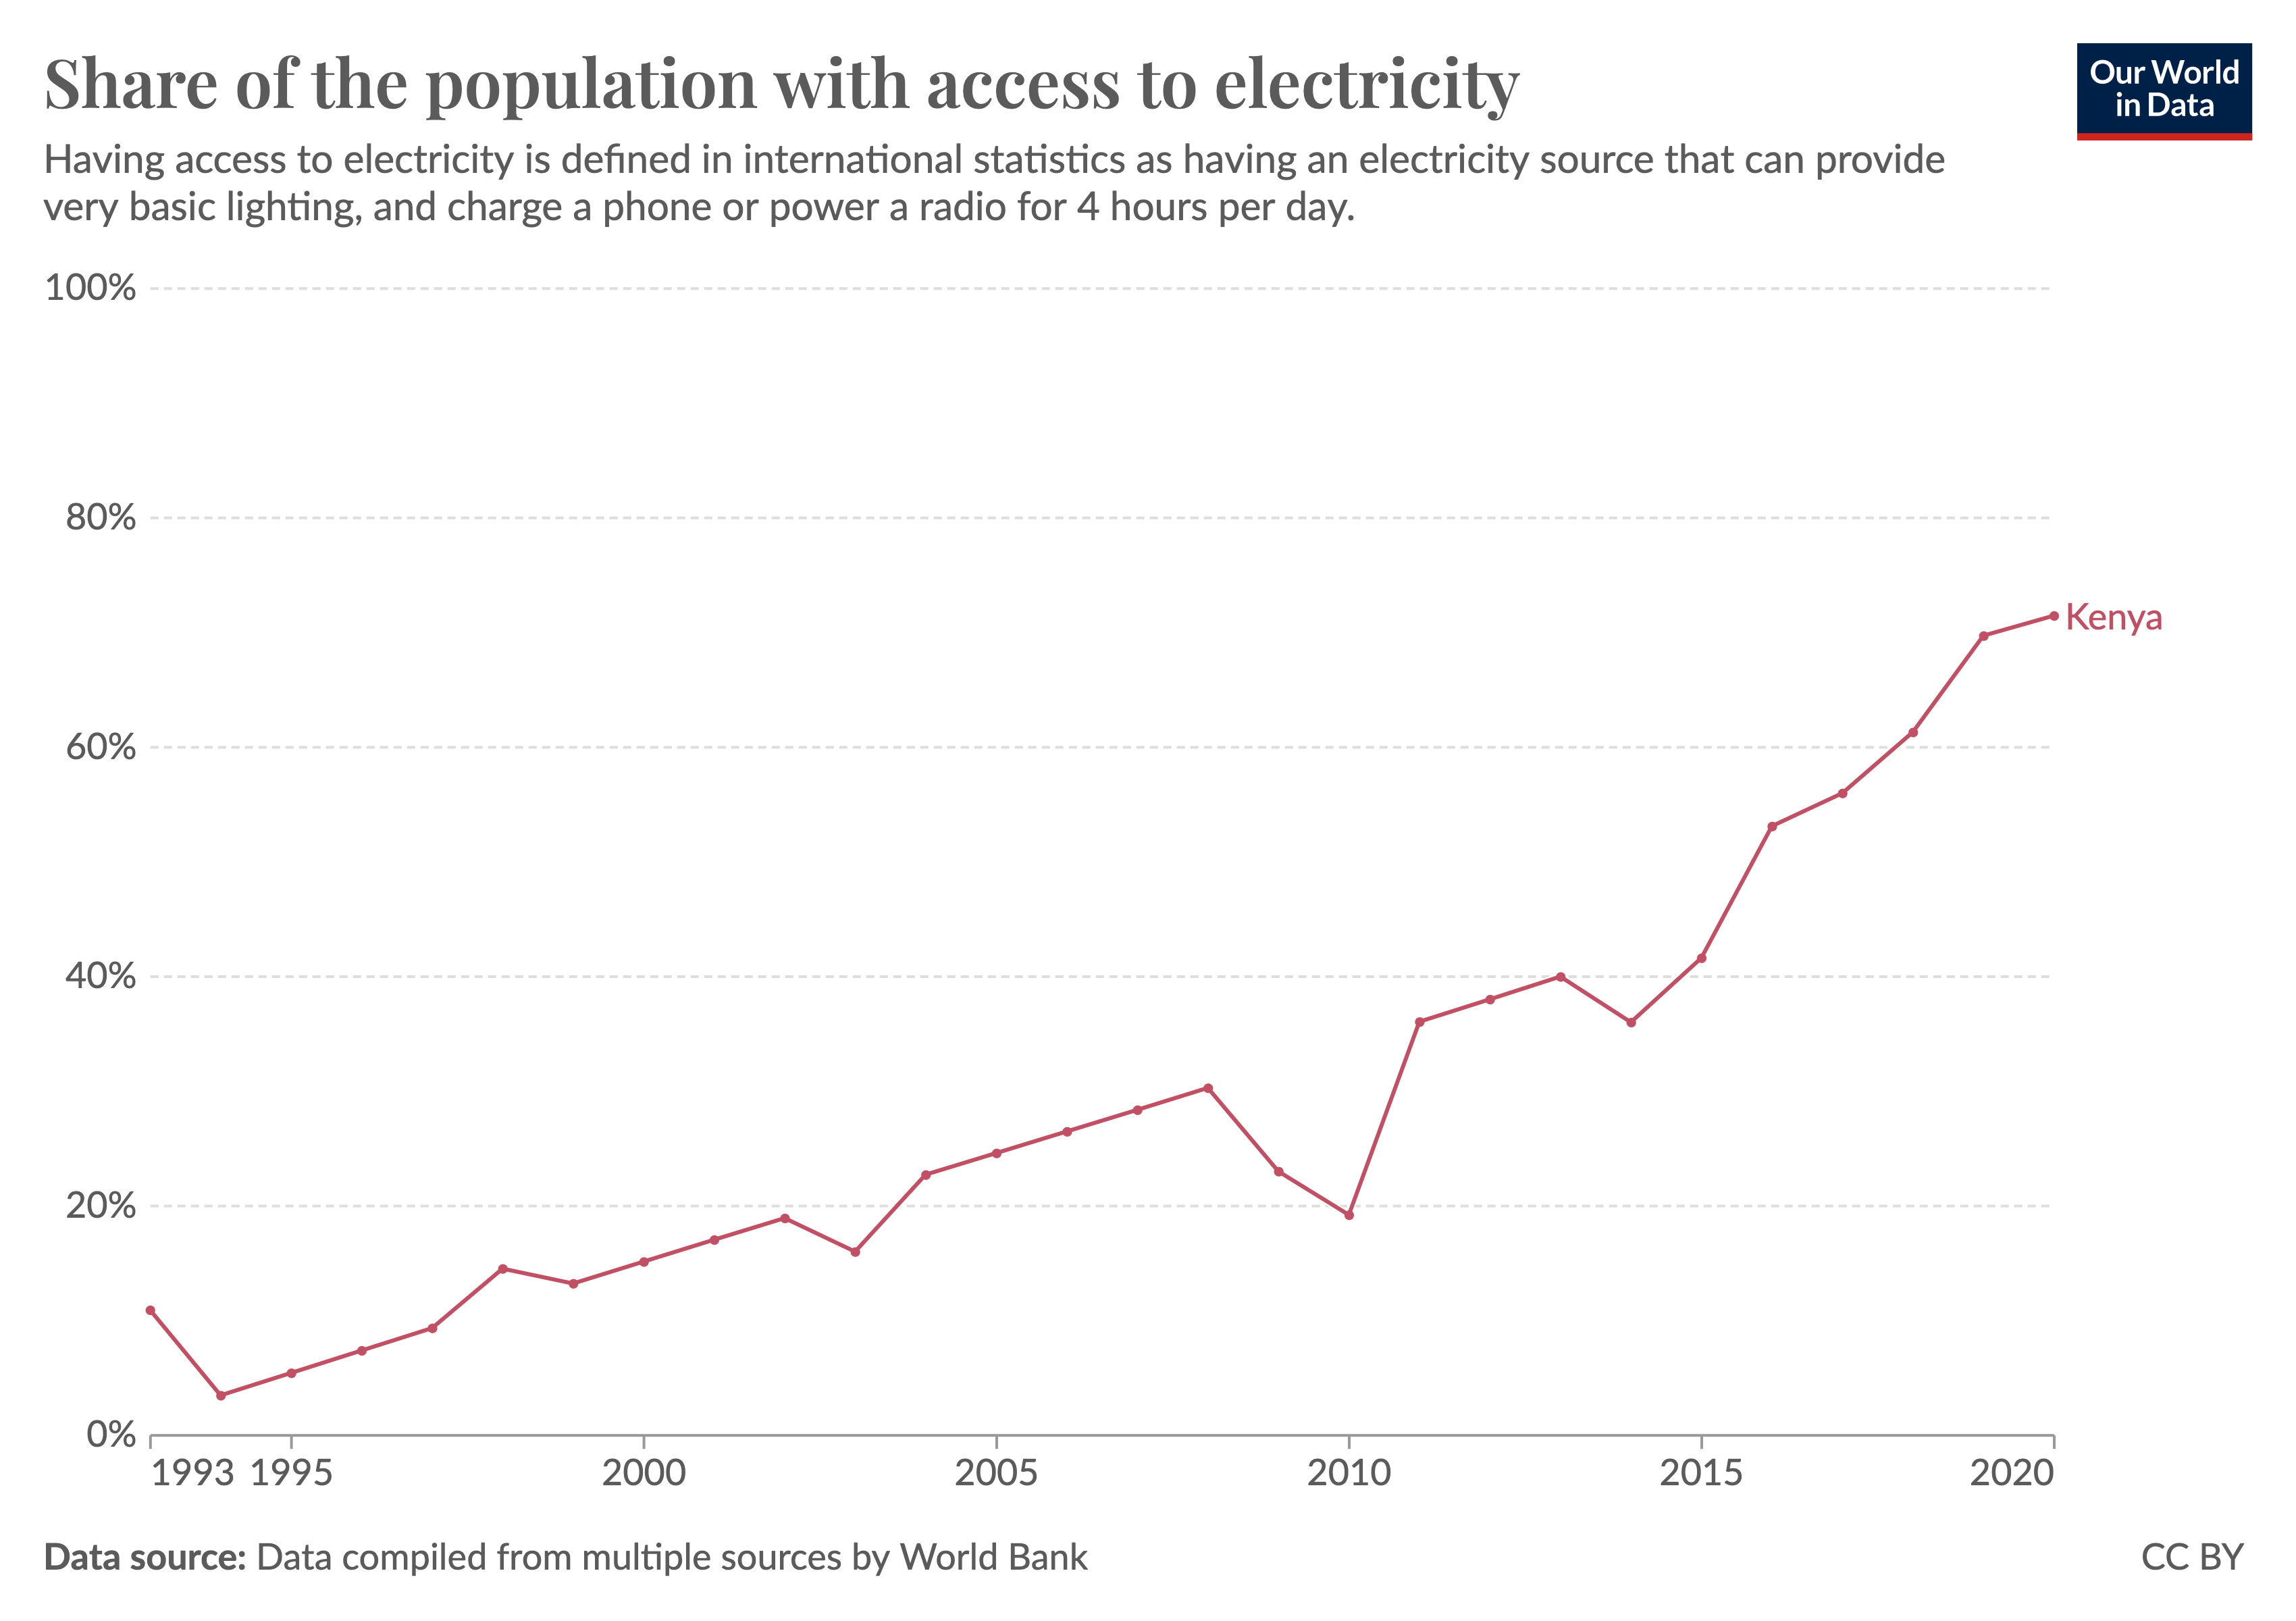 Chart showing that Kenya made substantial progress in providing access to electricity, From 5% to 71% in 25 years